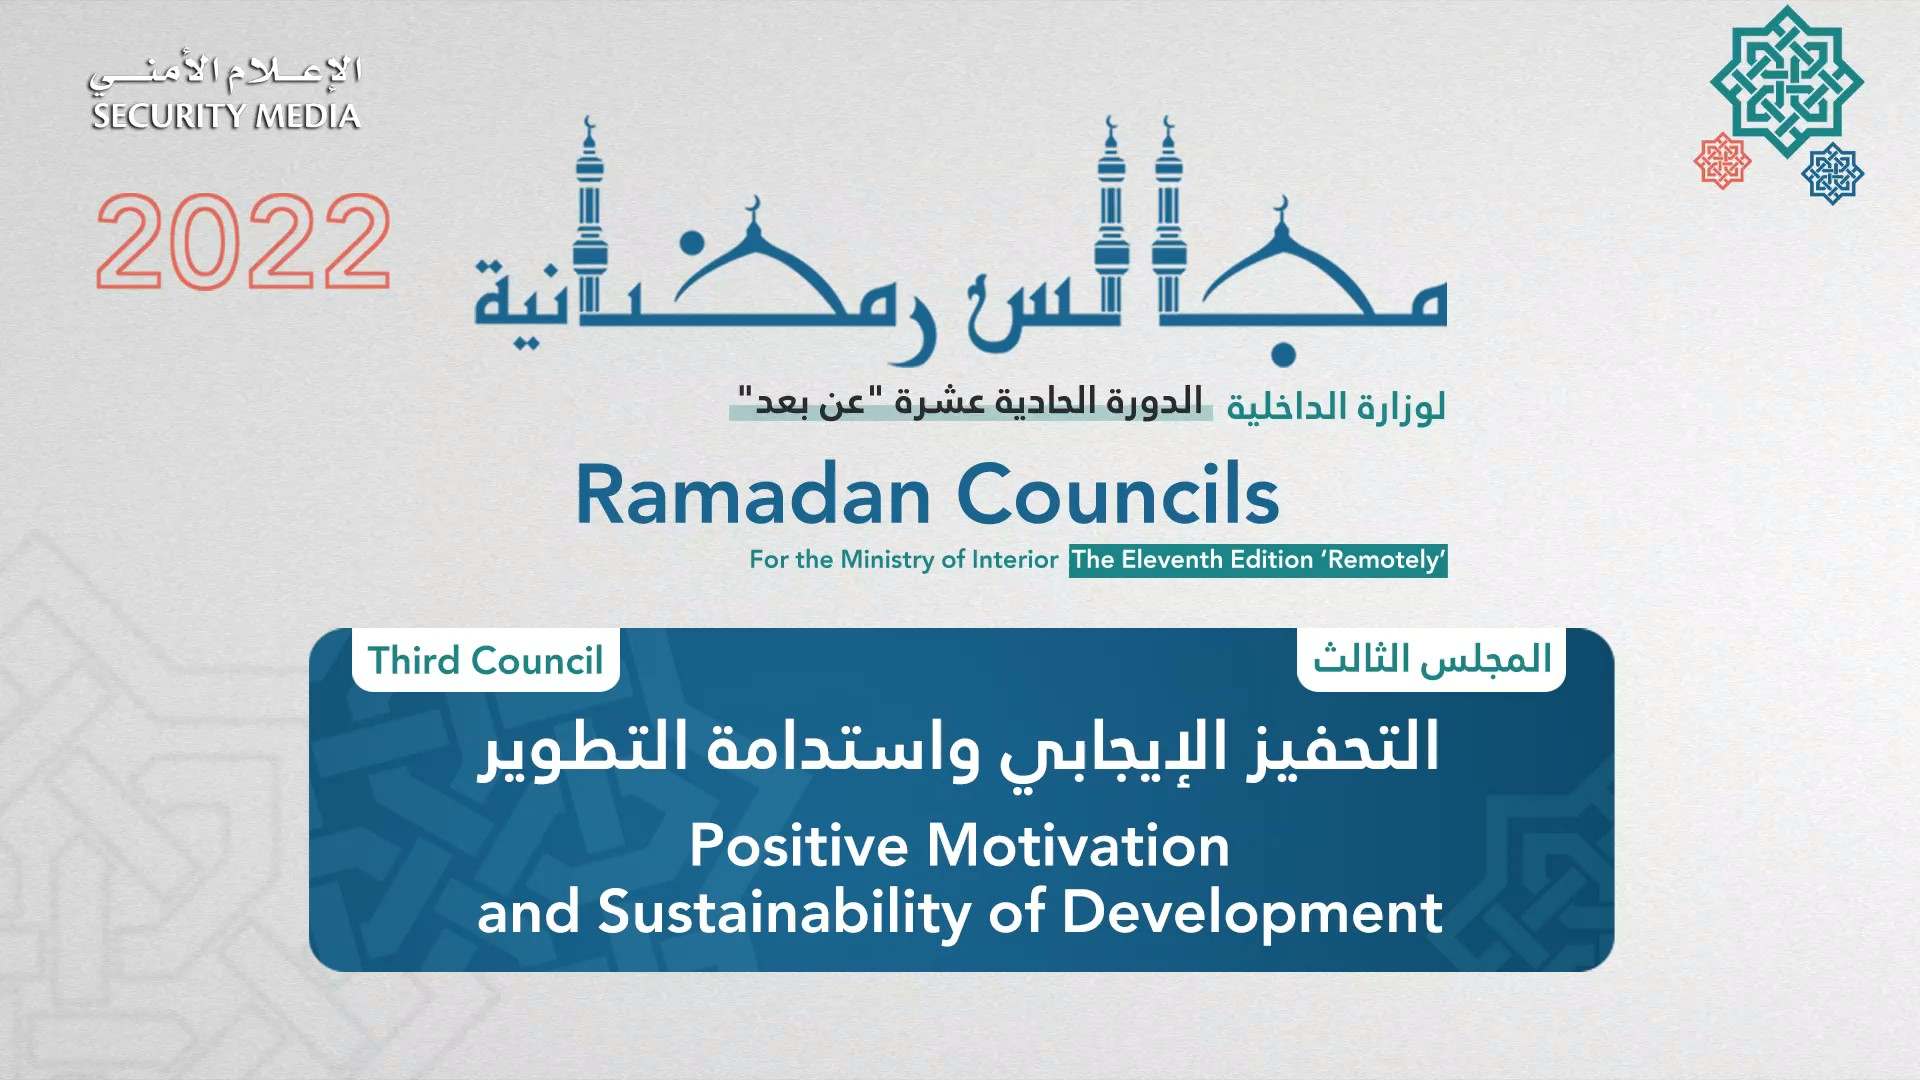 ‏MOI's 3rd Ramadan Council "Majlis" discusses "Positive Motivation and Sustainability of Development"